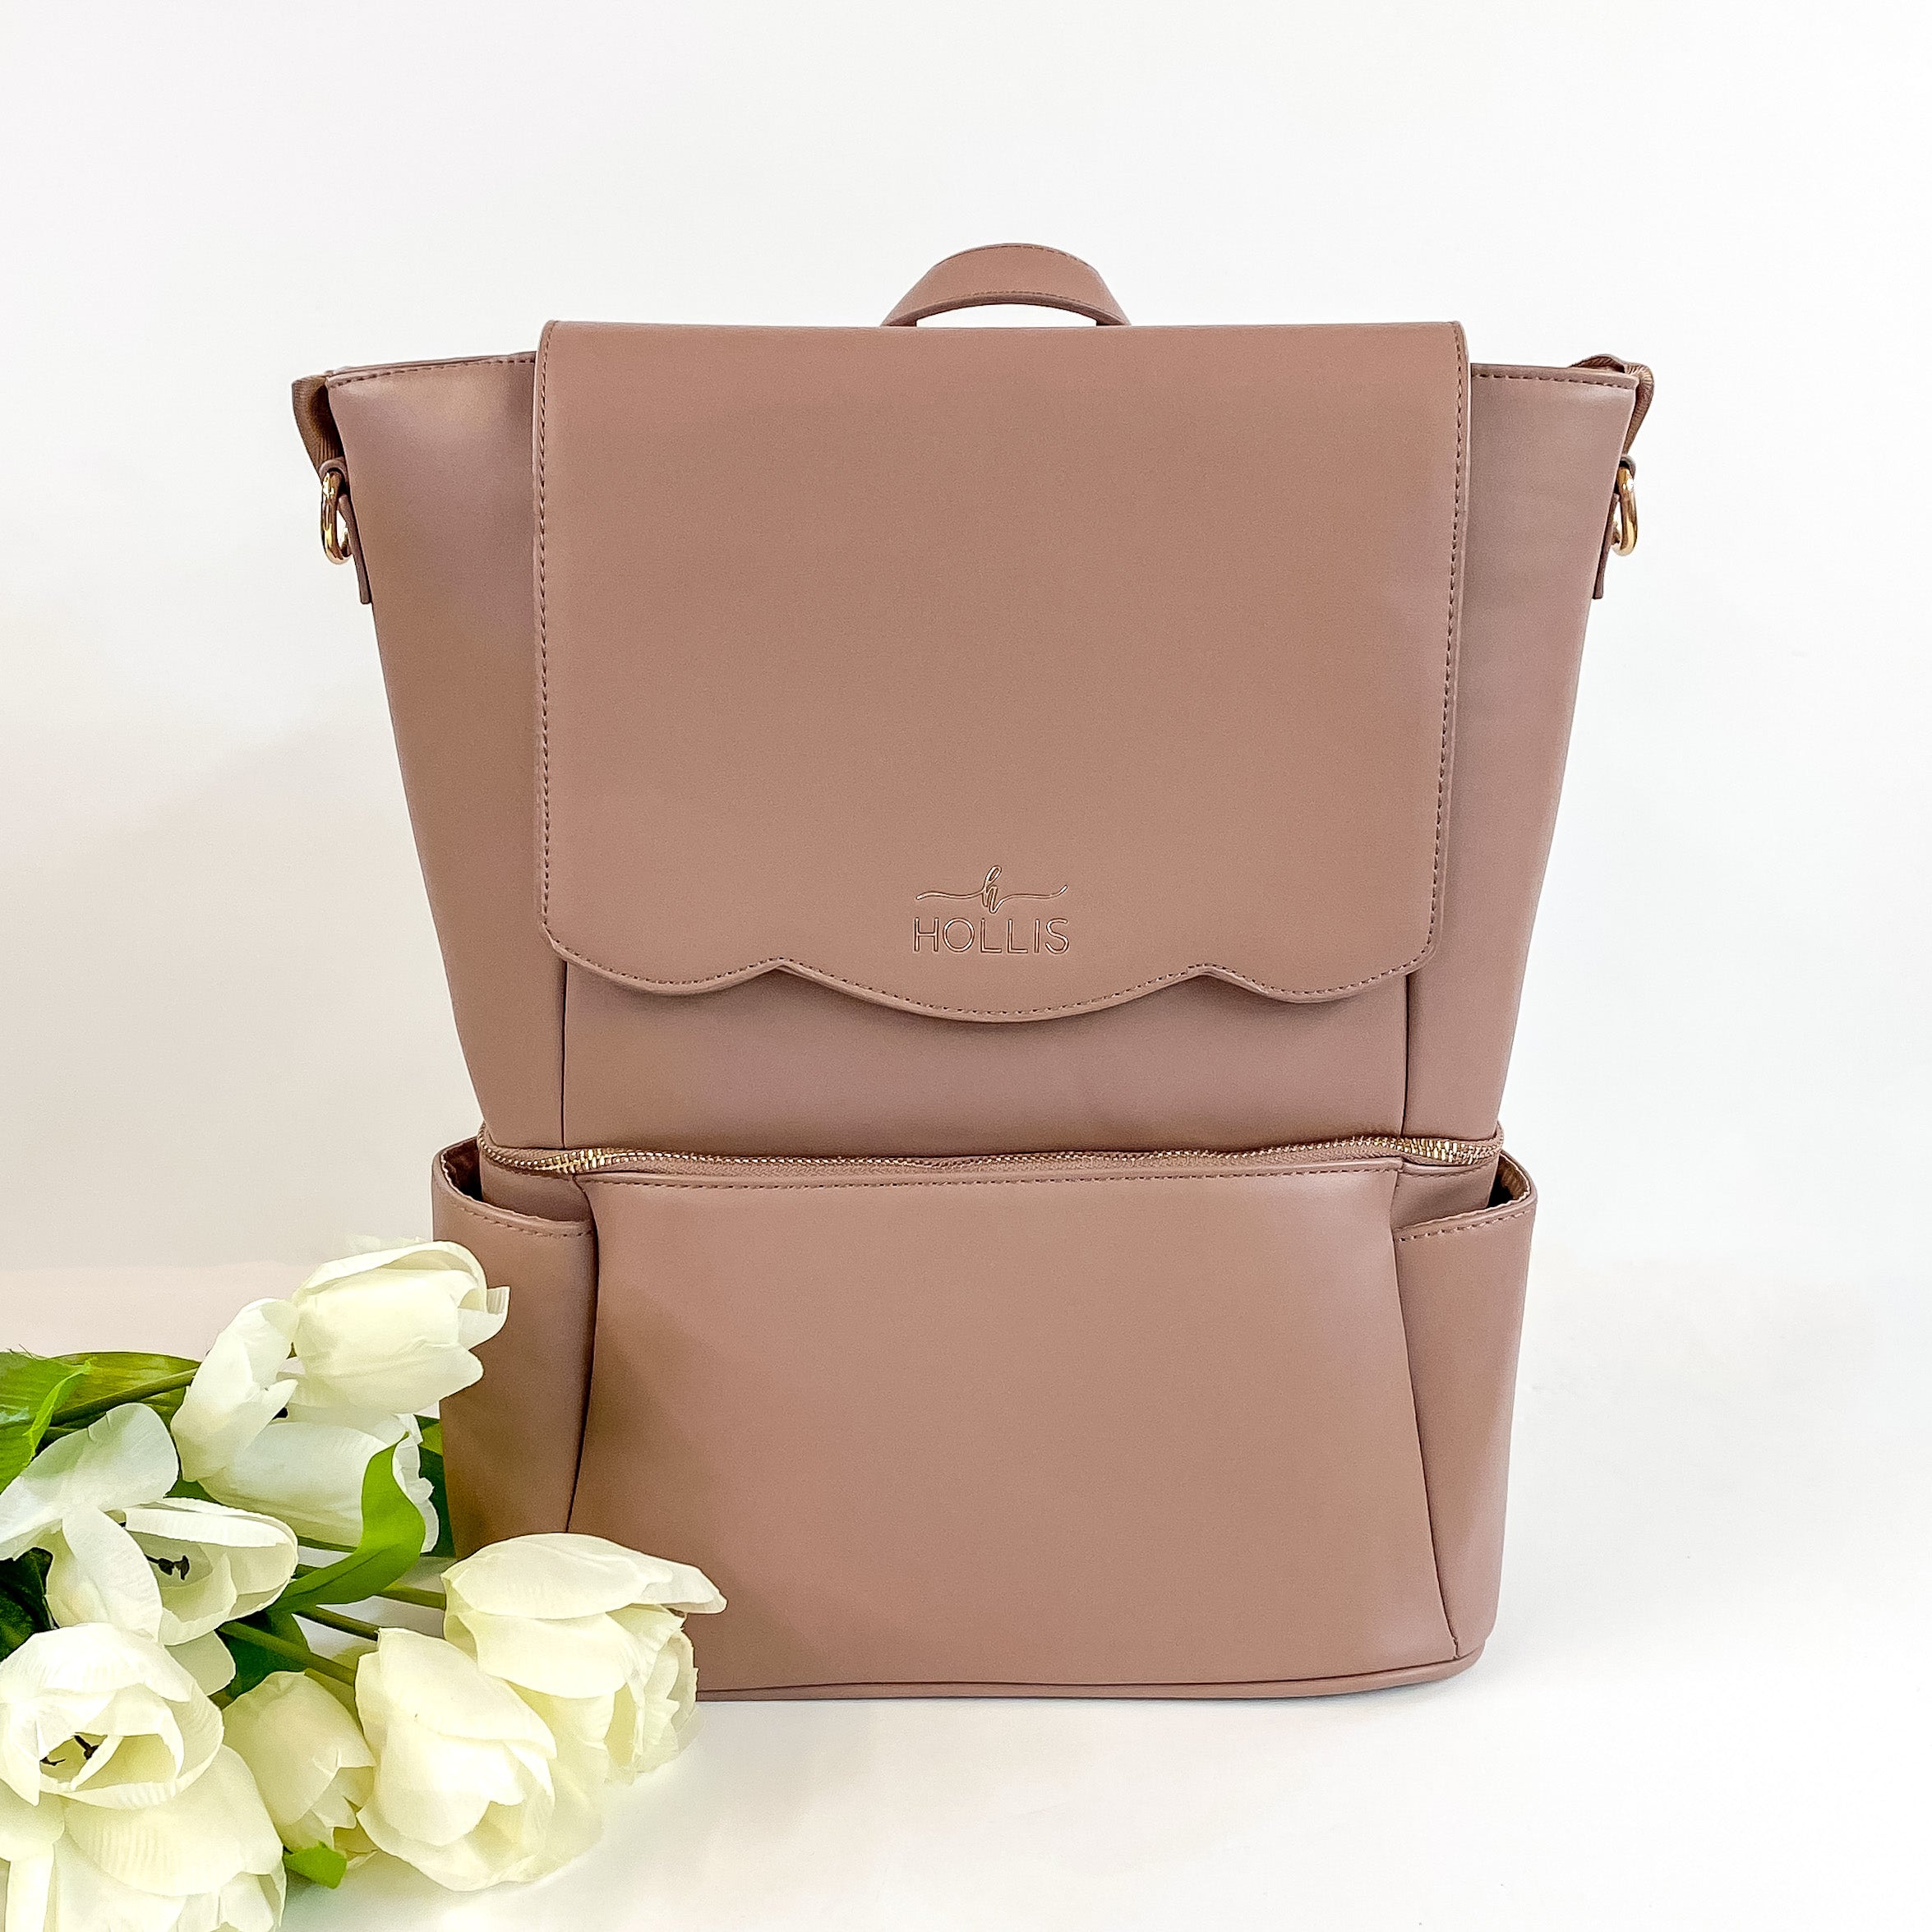 Hollis brand Diaper bag in metallic mocha. Has multiple departments and zippers. Pictured on a white background with roses in the bottom left corner. 